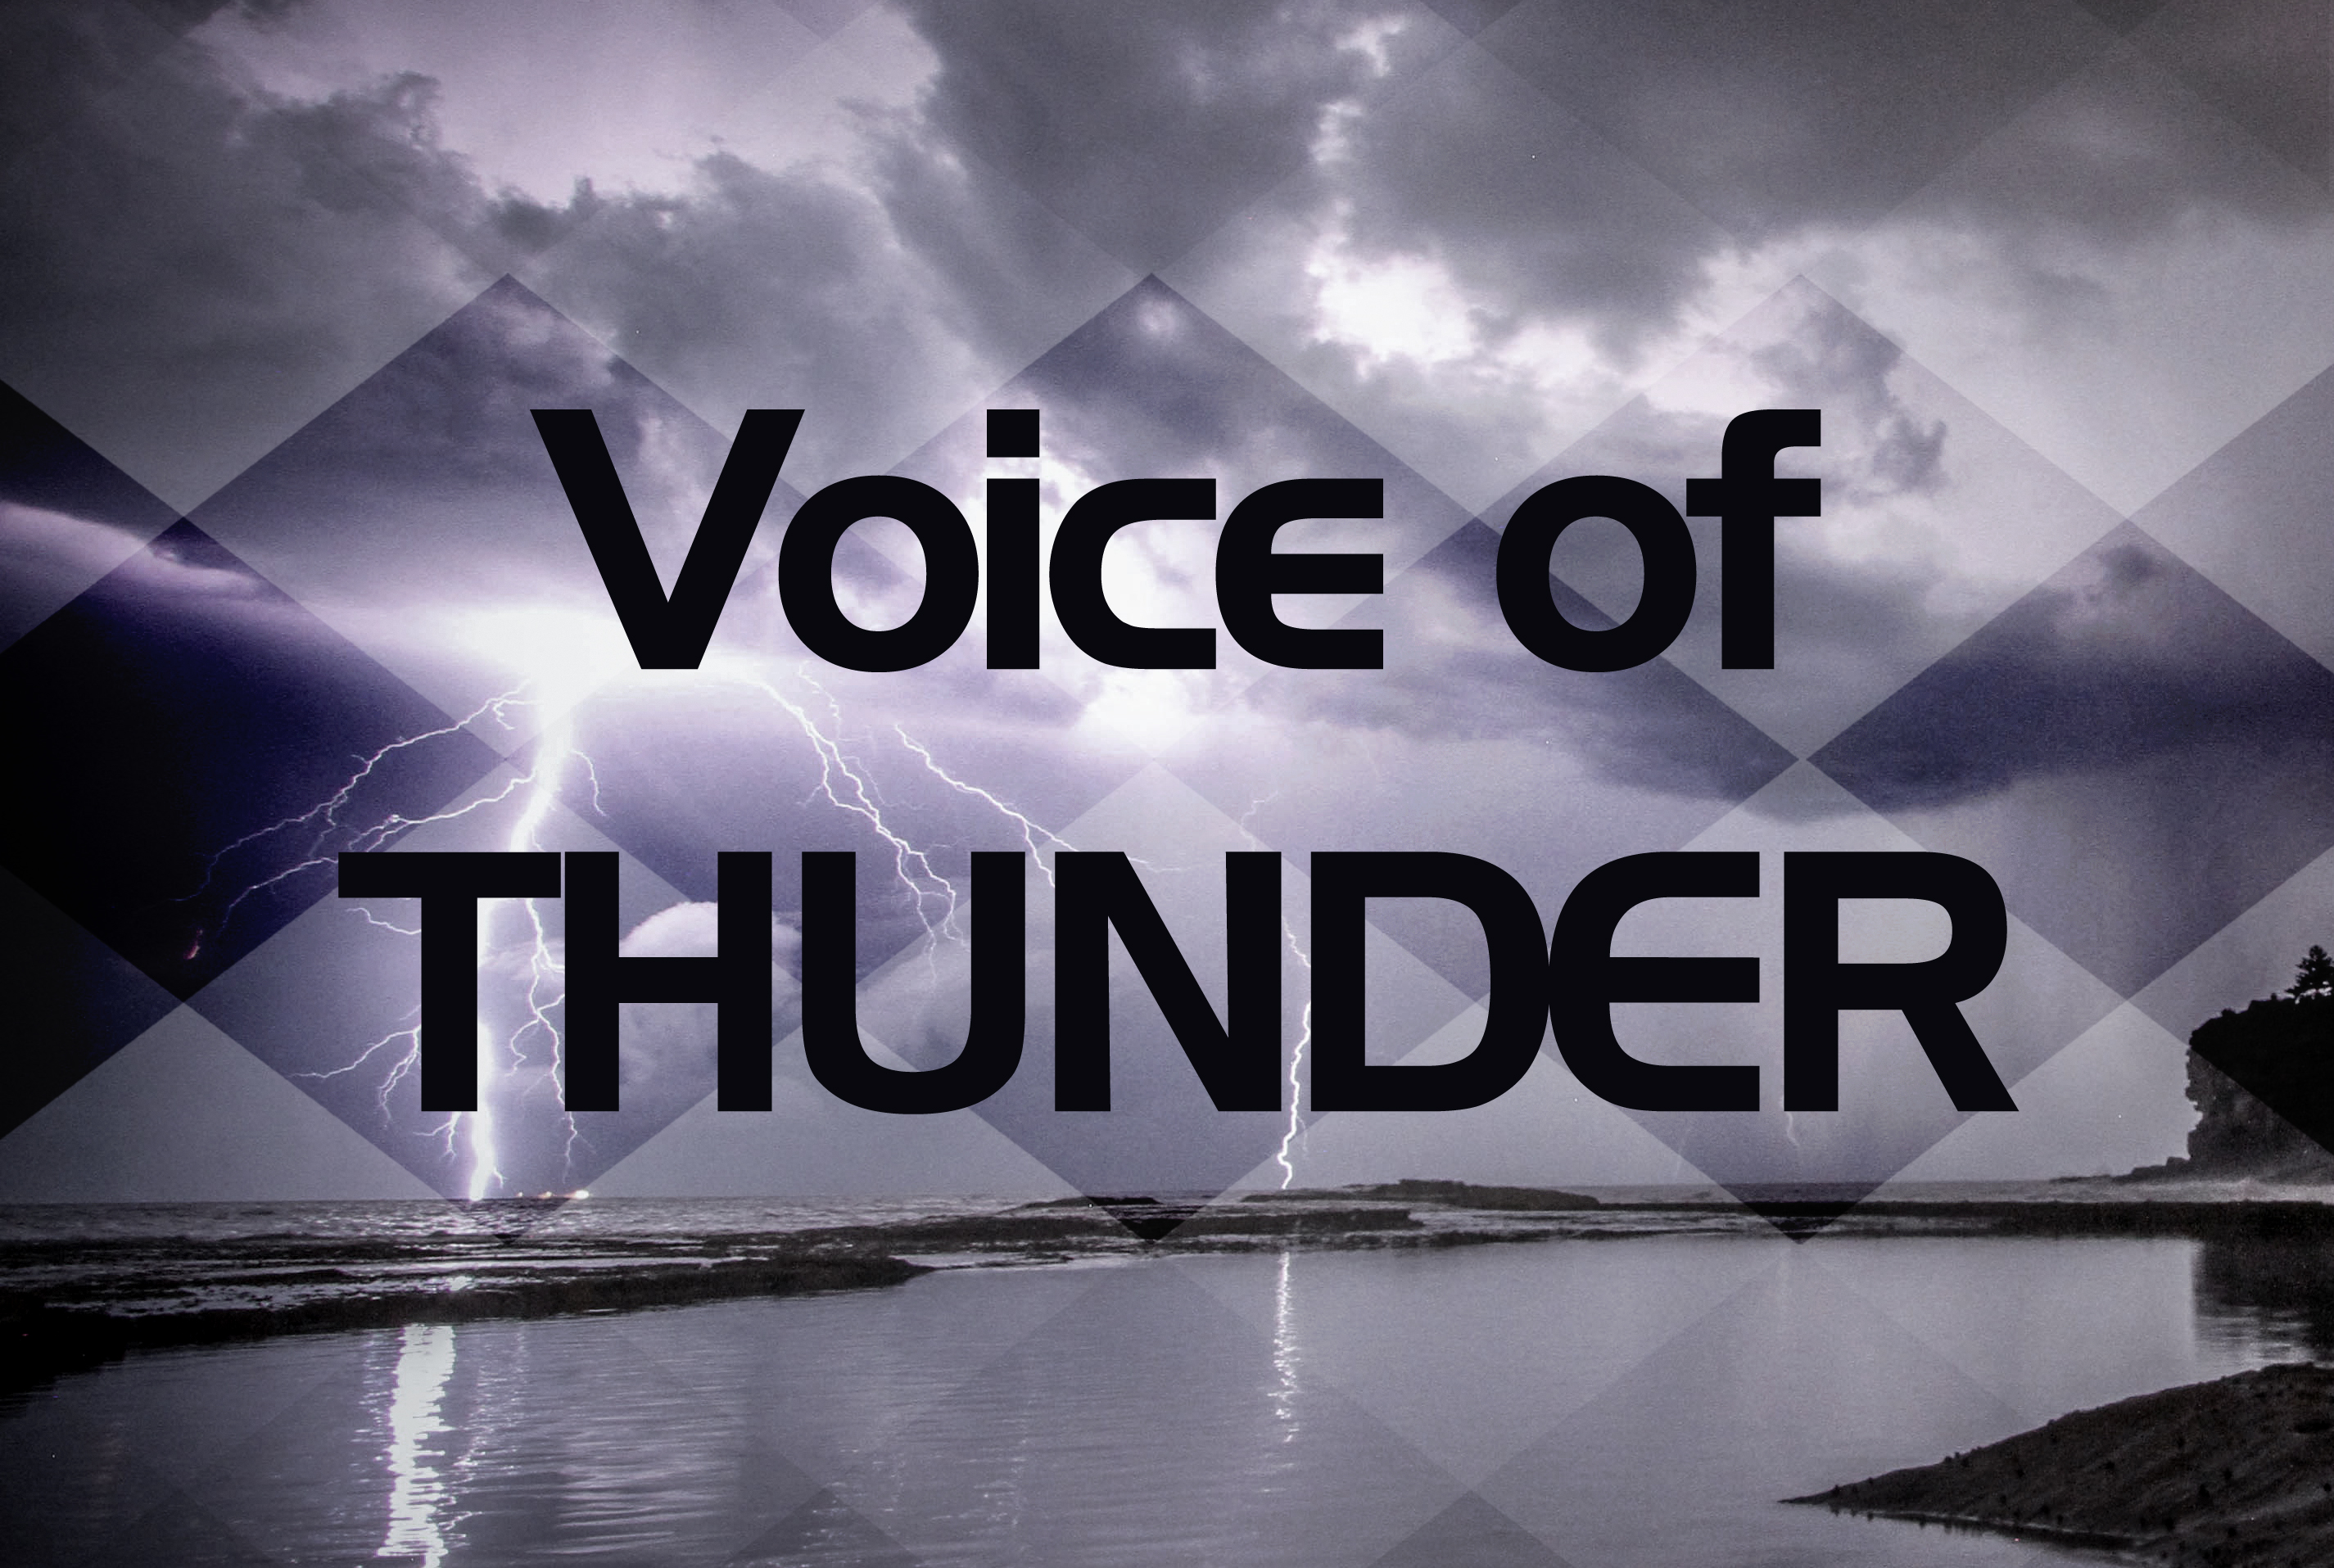 The Voice of Thunder banner